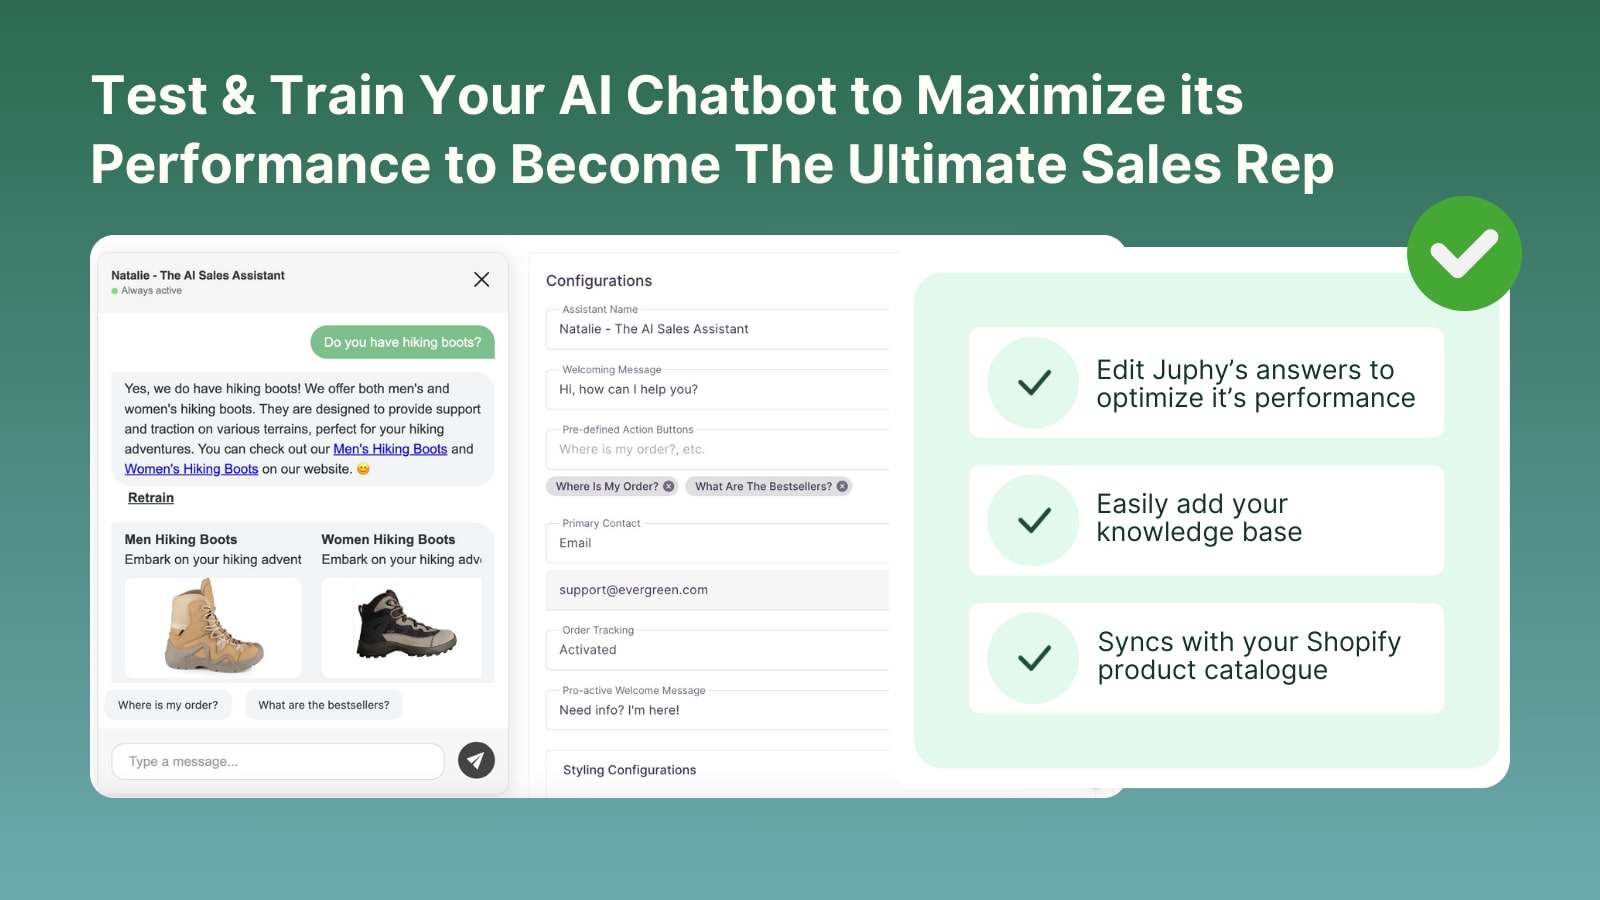 You can actively mold and refine the responses provided by your AI shopping assistant.